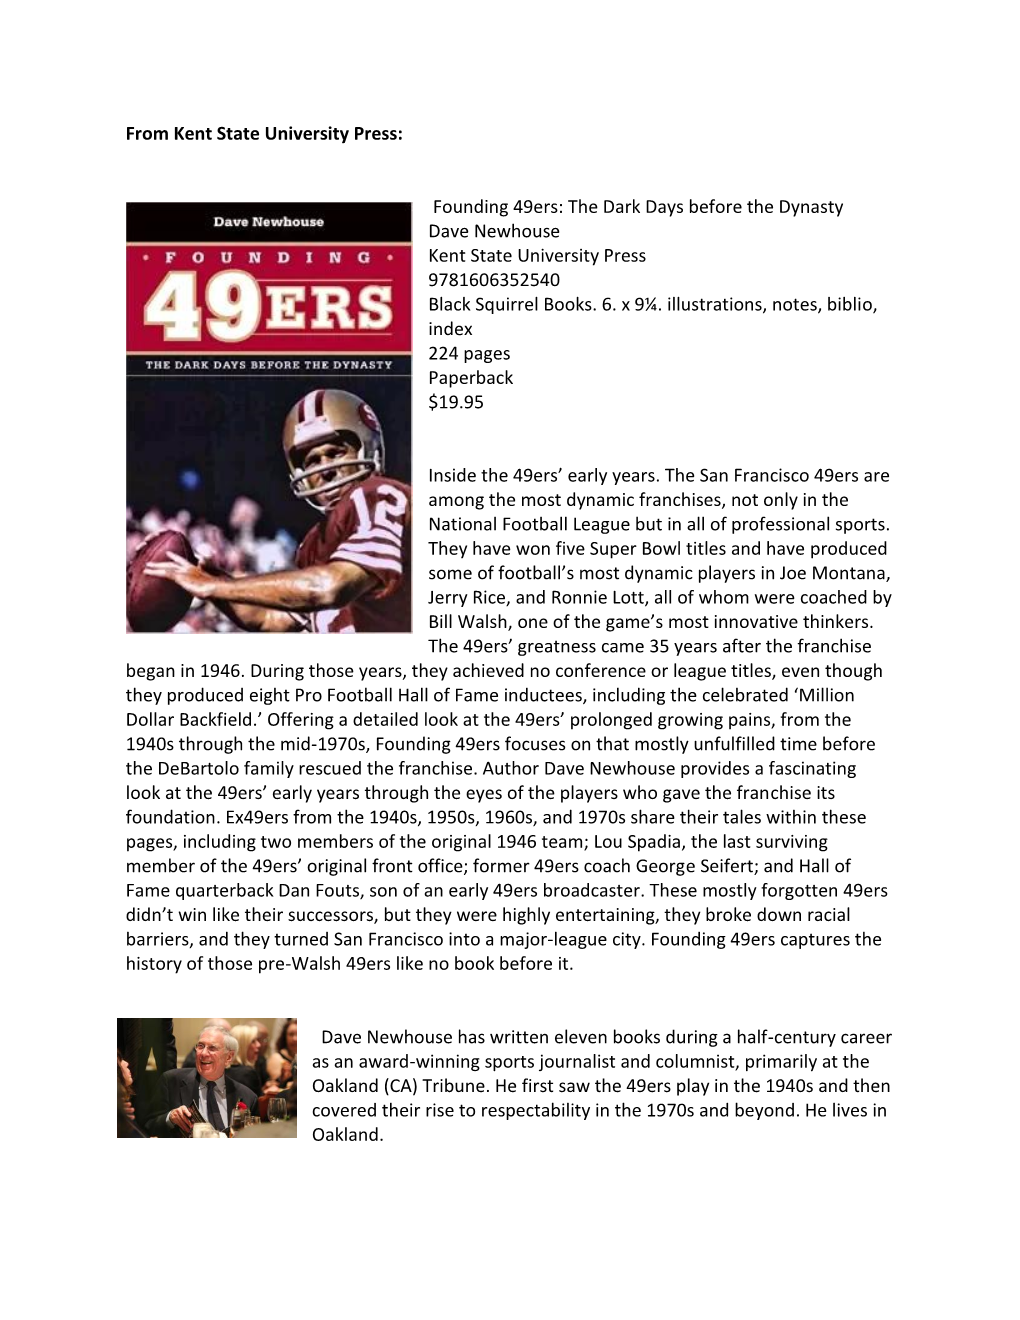 Founding 49Ers: the Dark Days Before the Dynasty Dave Newhouse Kent State University Press 9781606352540 Black Squirrel Books